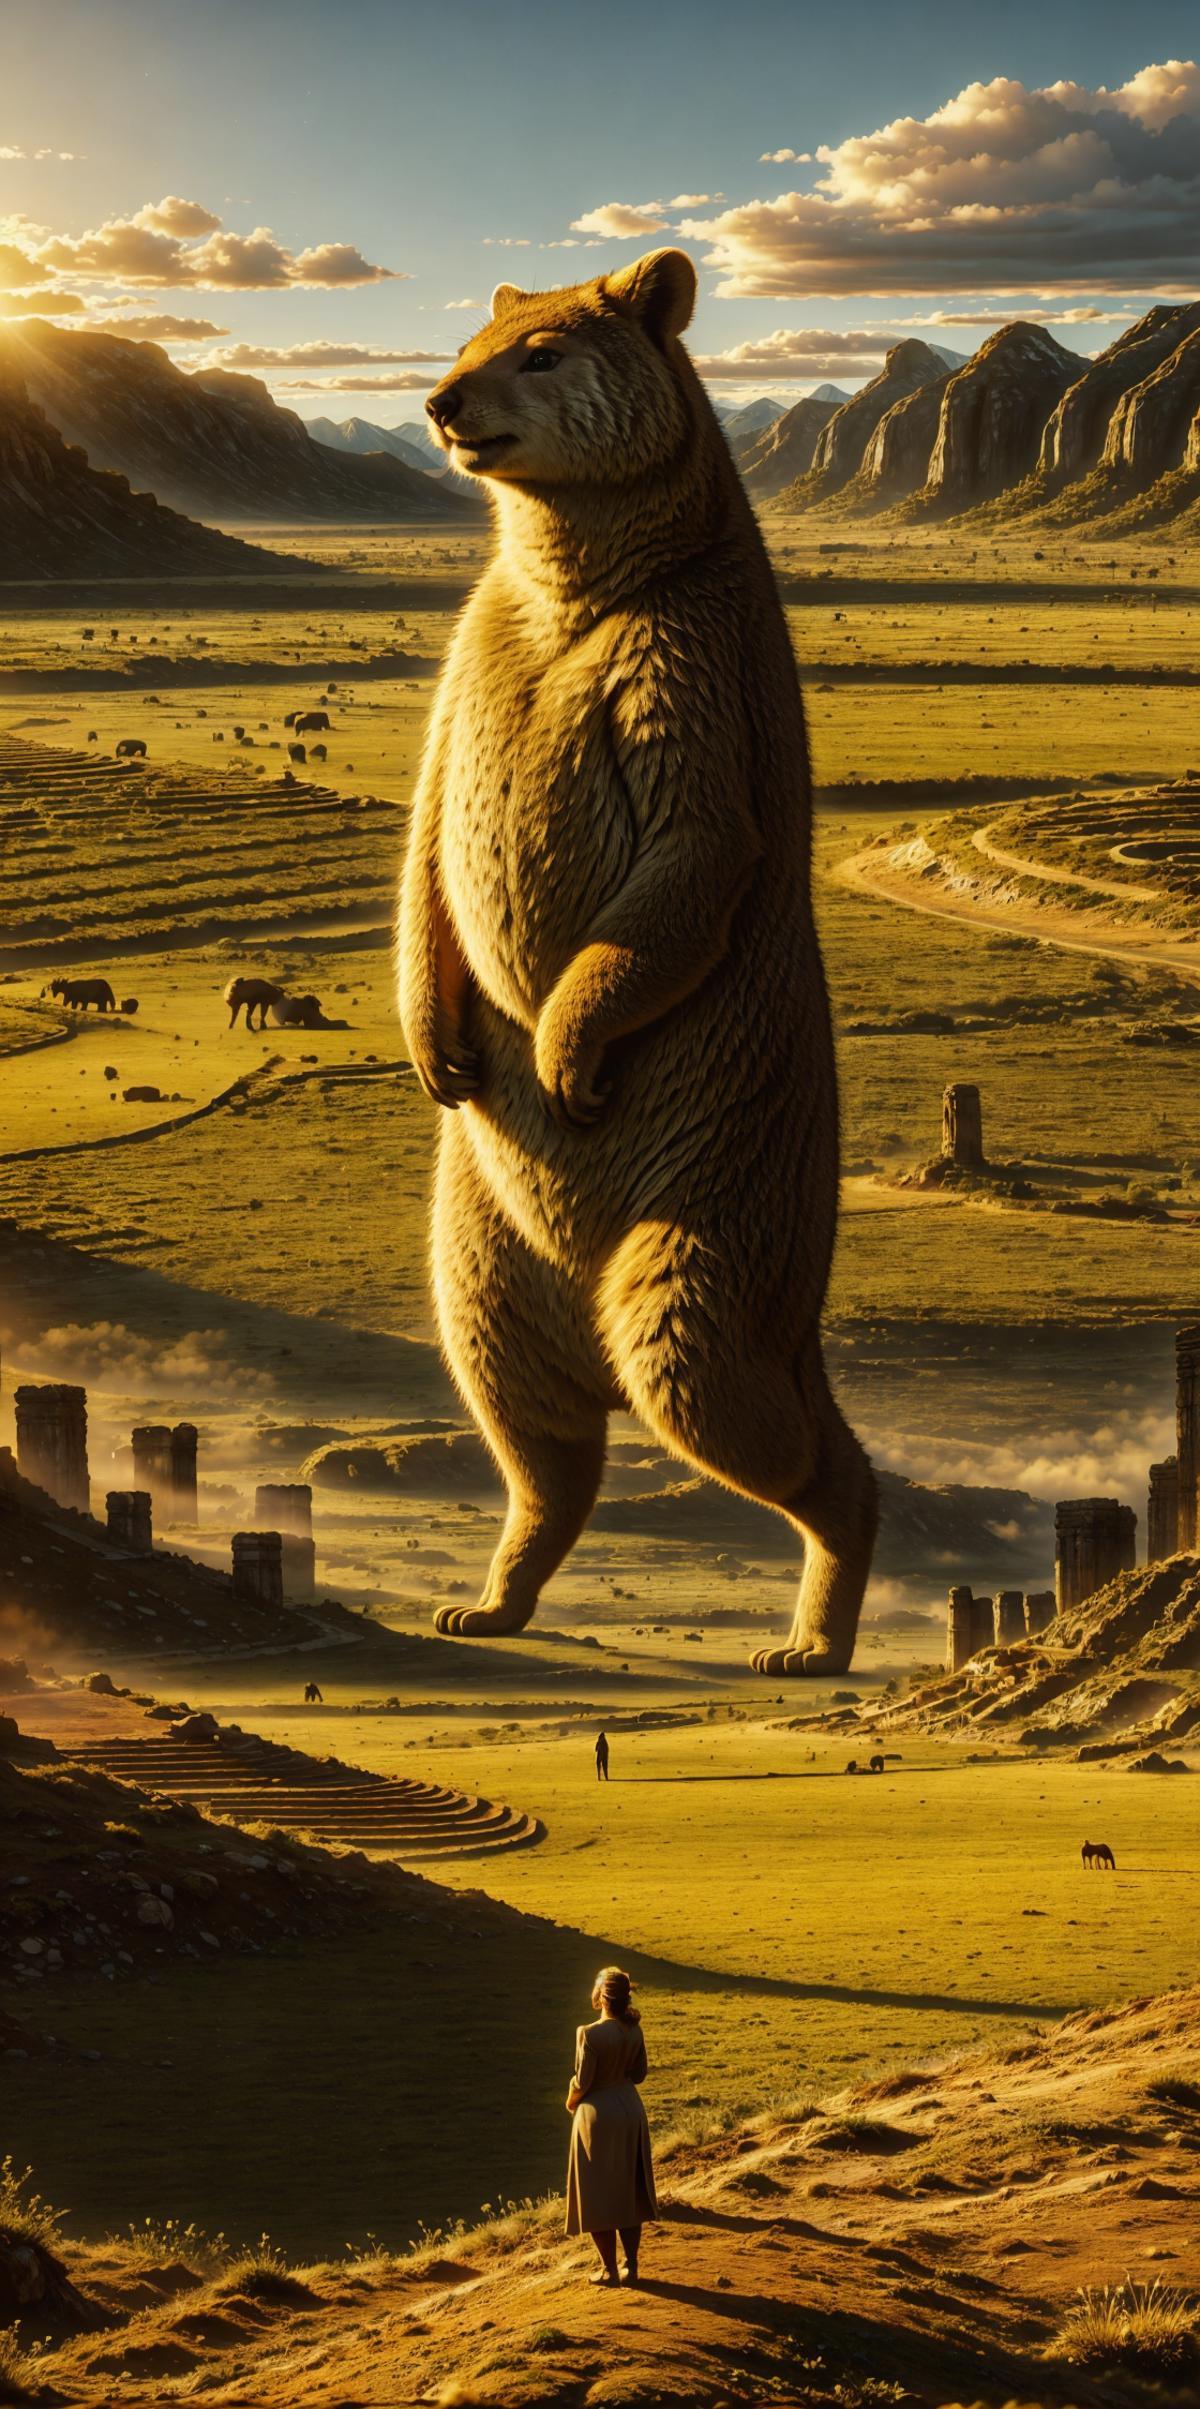 Ancient Creatures of Monumental Proportions image by Vladimir1987